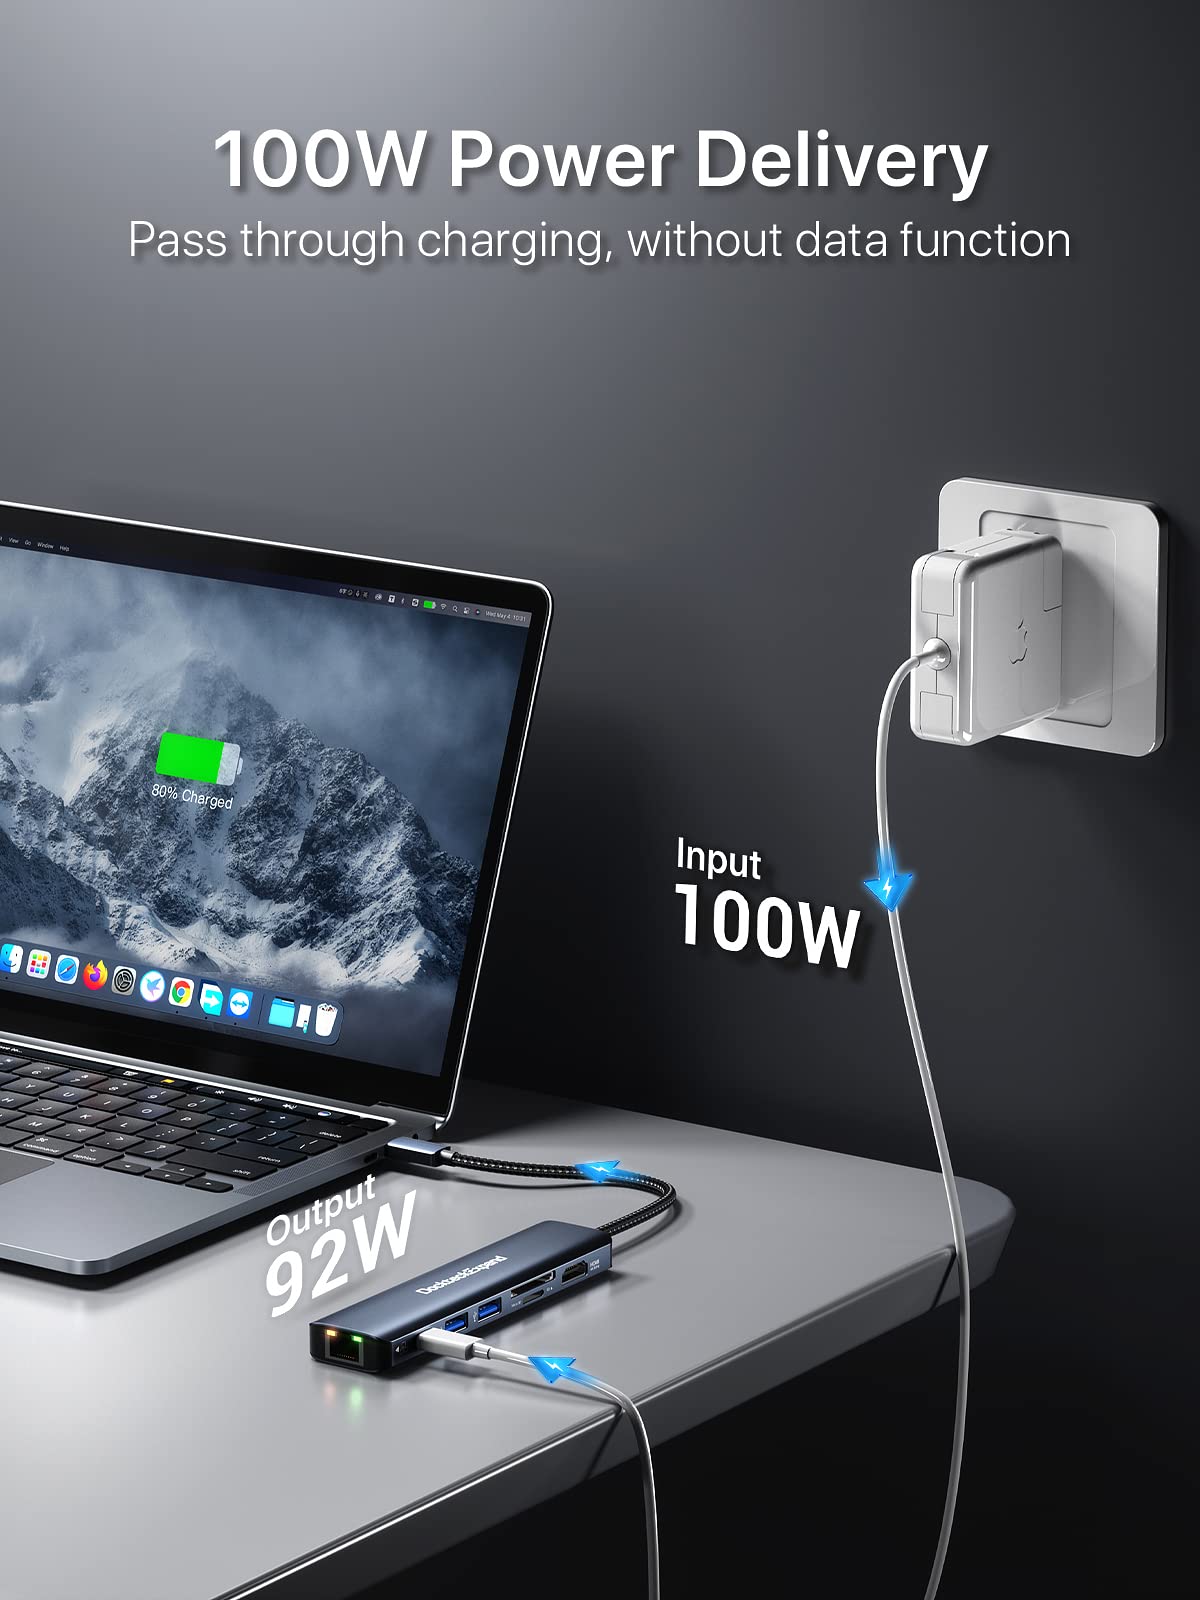 USB C Hub Ethernet, DockteckExpand 7-in-1 Multiport Adapter Type C to 4K@60Hz HDMI, Gigabit Ethernet, 100W PD Charging, 2 USB 3.0, SD/TF Card Readers, for MacBook Pro/Air, iPad Pro/Air, XPS and More